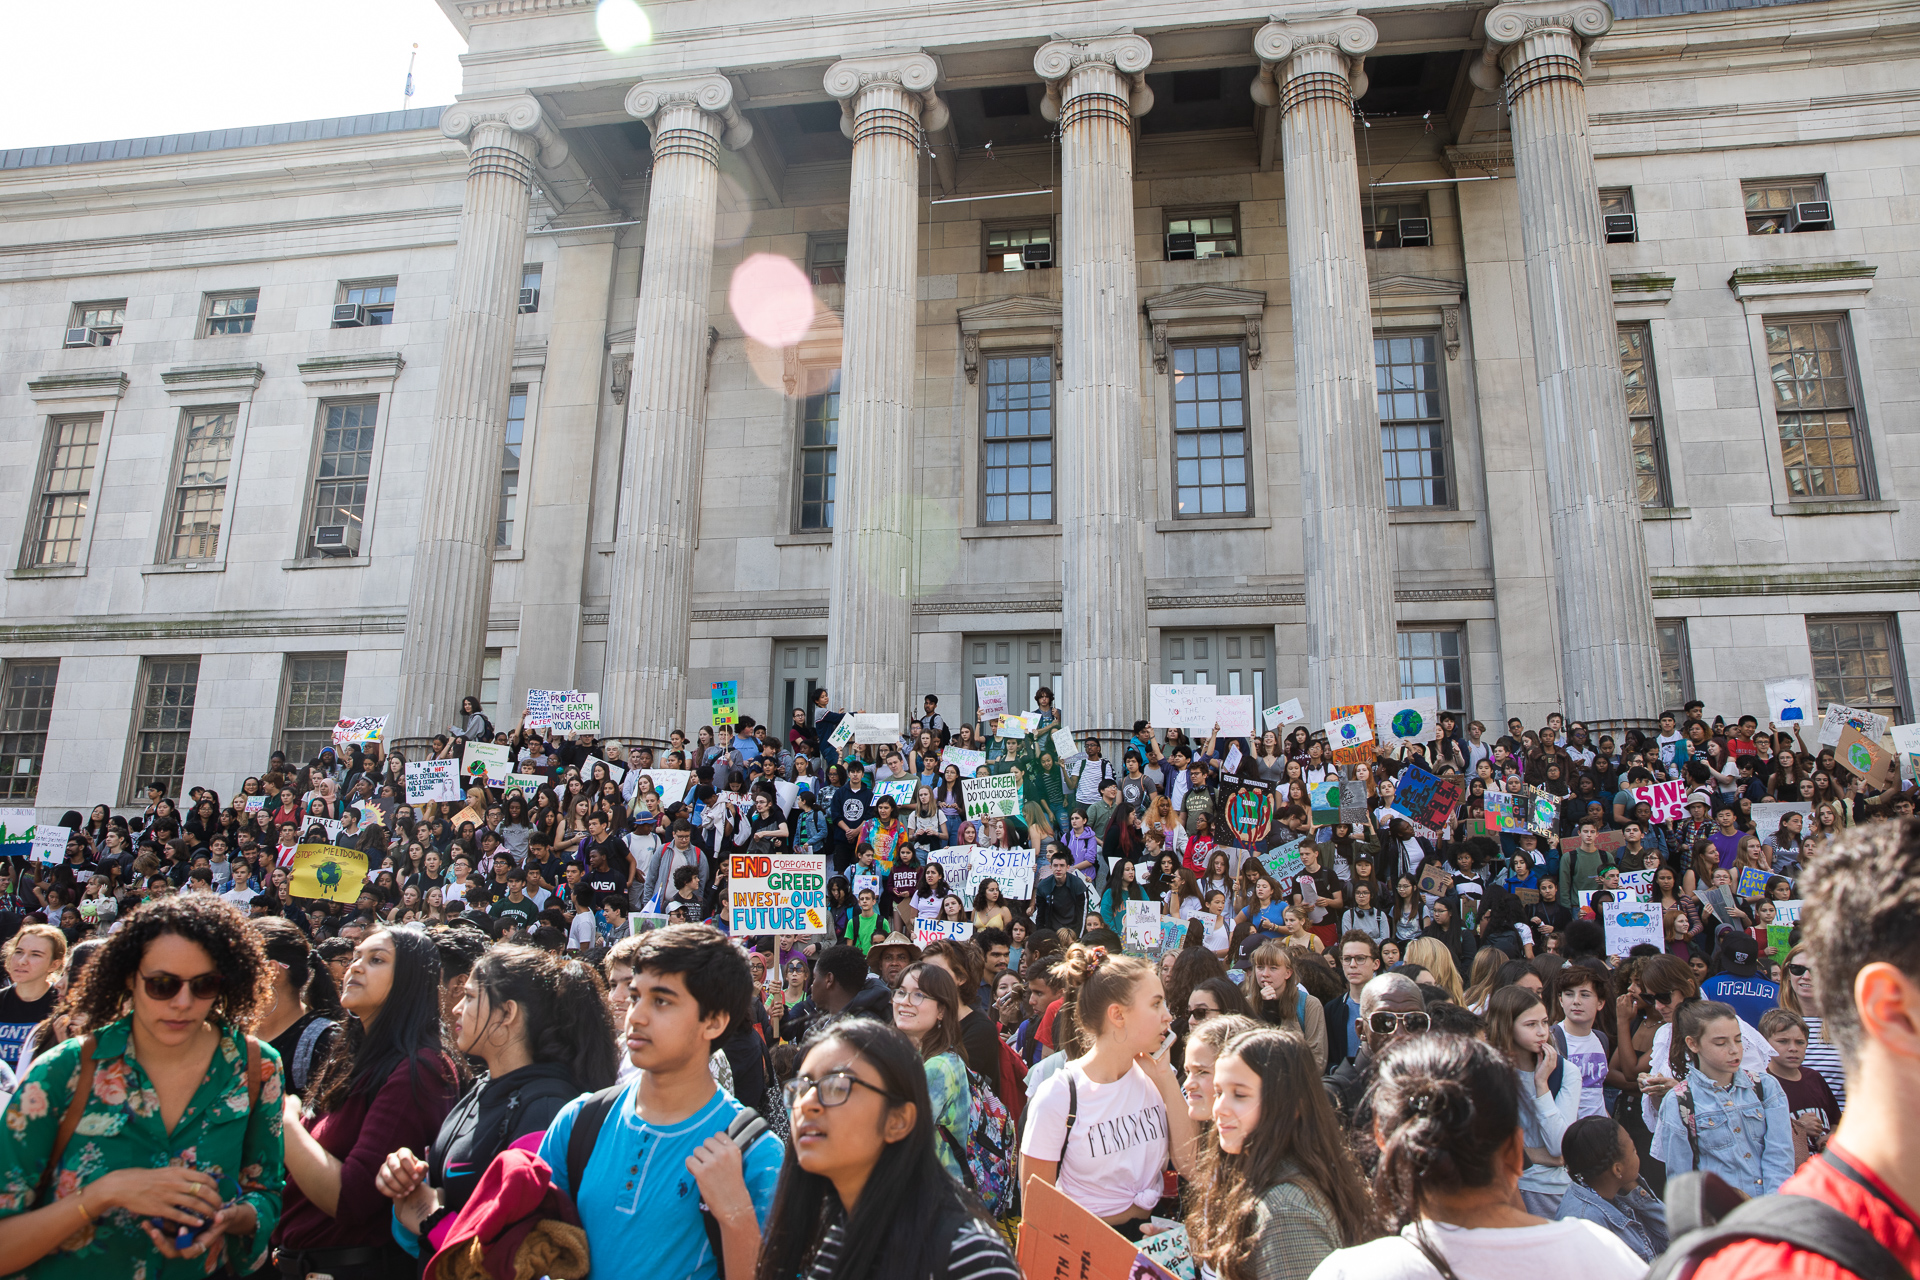 Over five Brooklyn schools met at Borough Hall to make their voices heard.